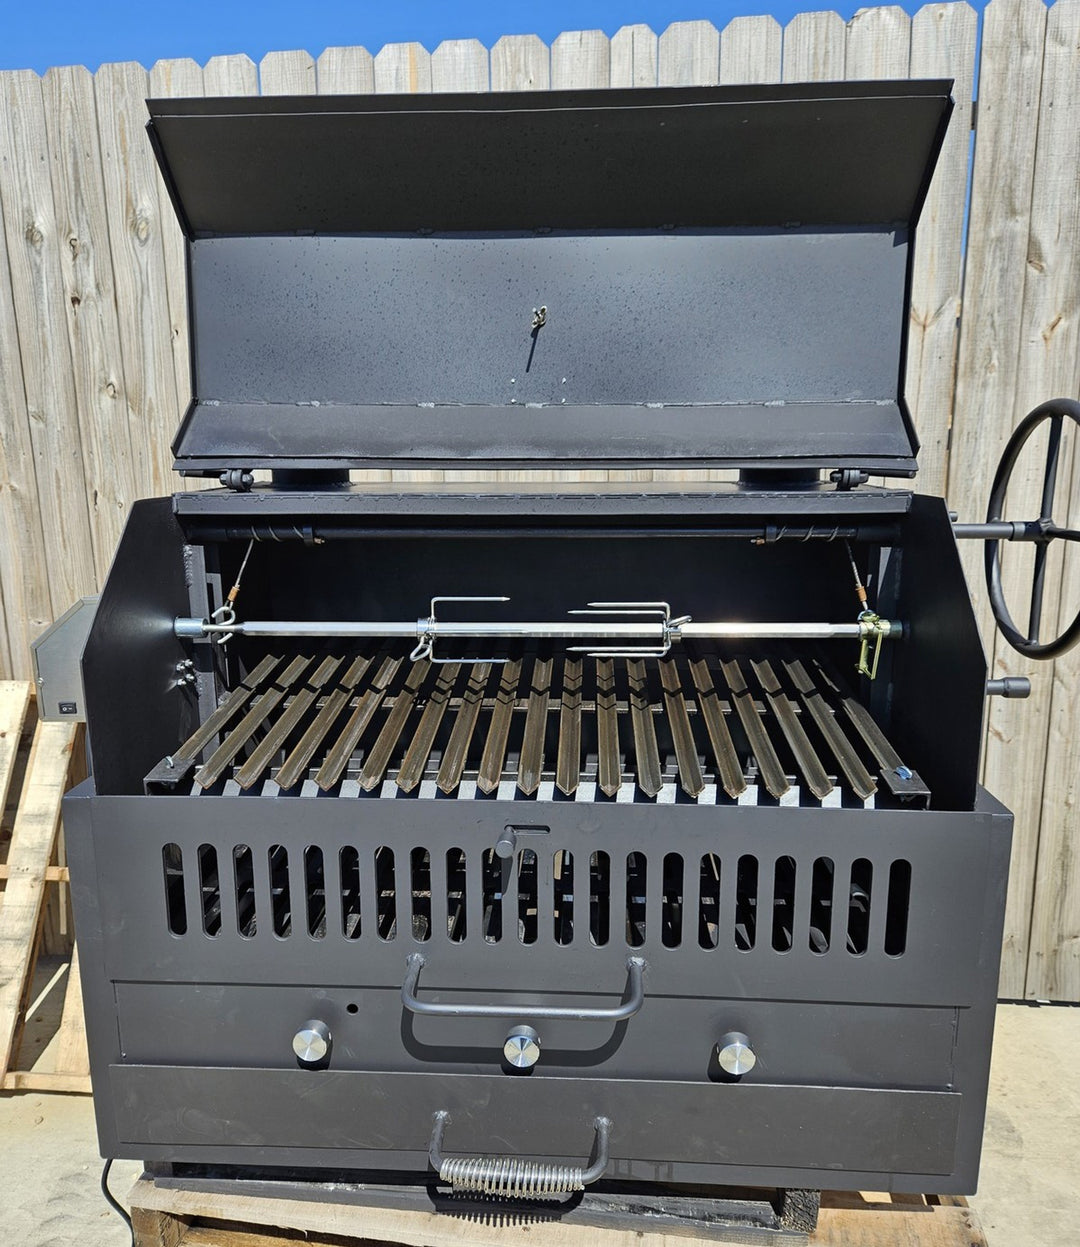 Hybrid Built-In Grill for Gas, Charcoal, and Wood Fire Cooking - Heritage Backyard